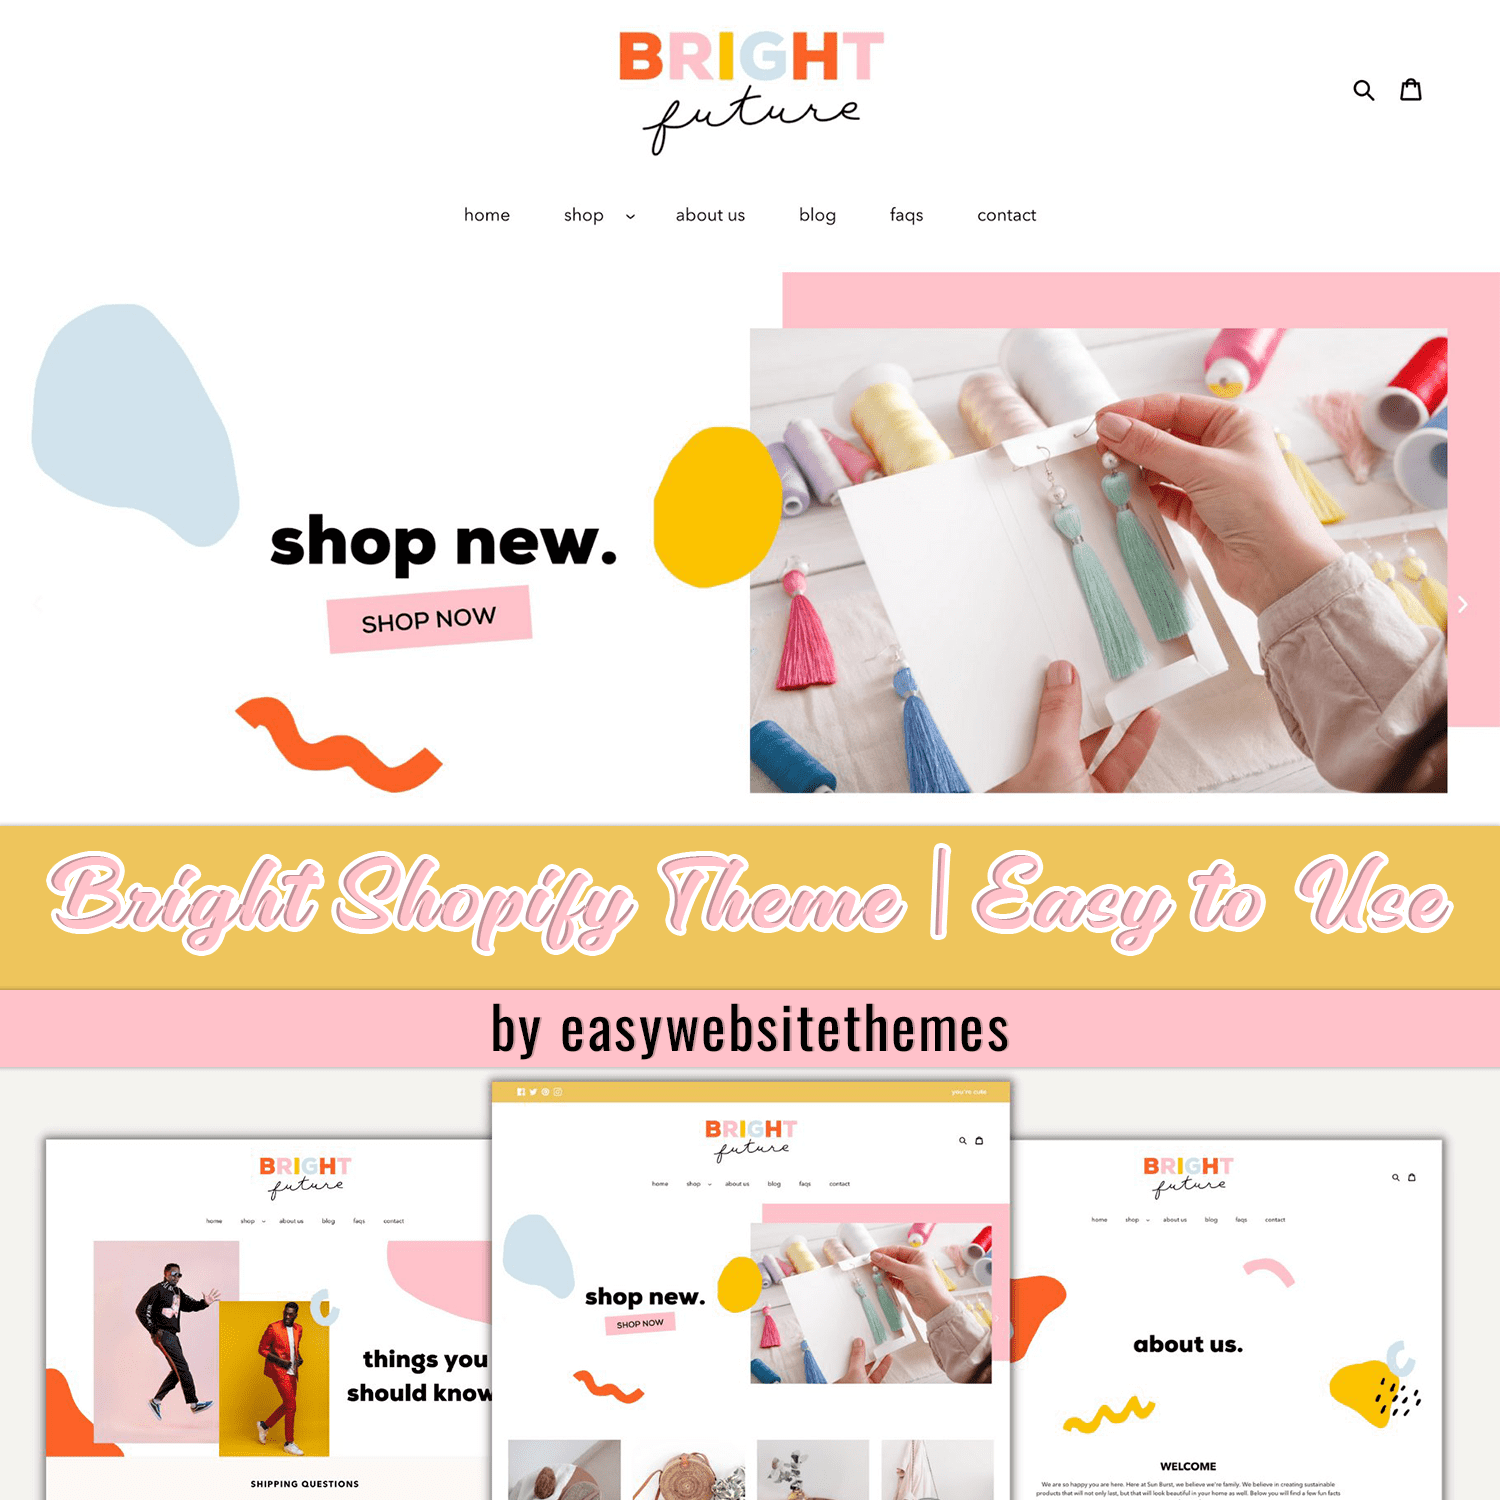 Bright Shopify Theme | Easy to Use cover.